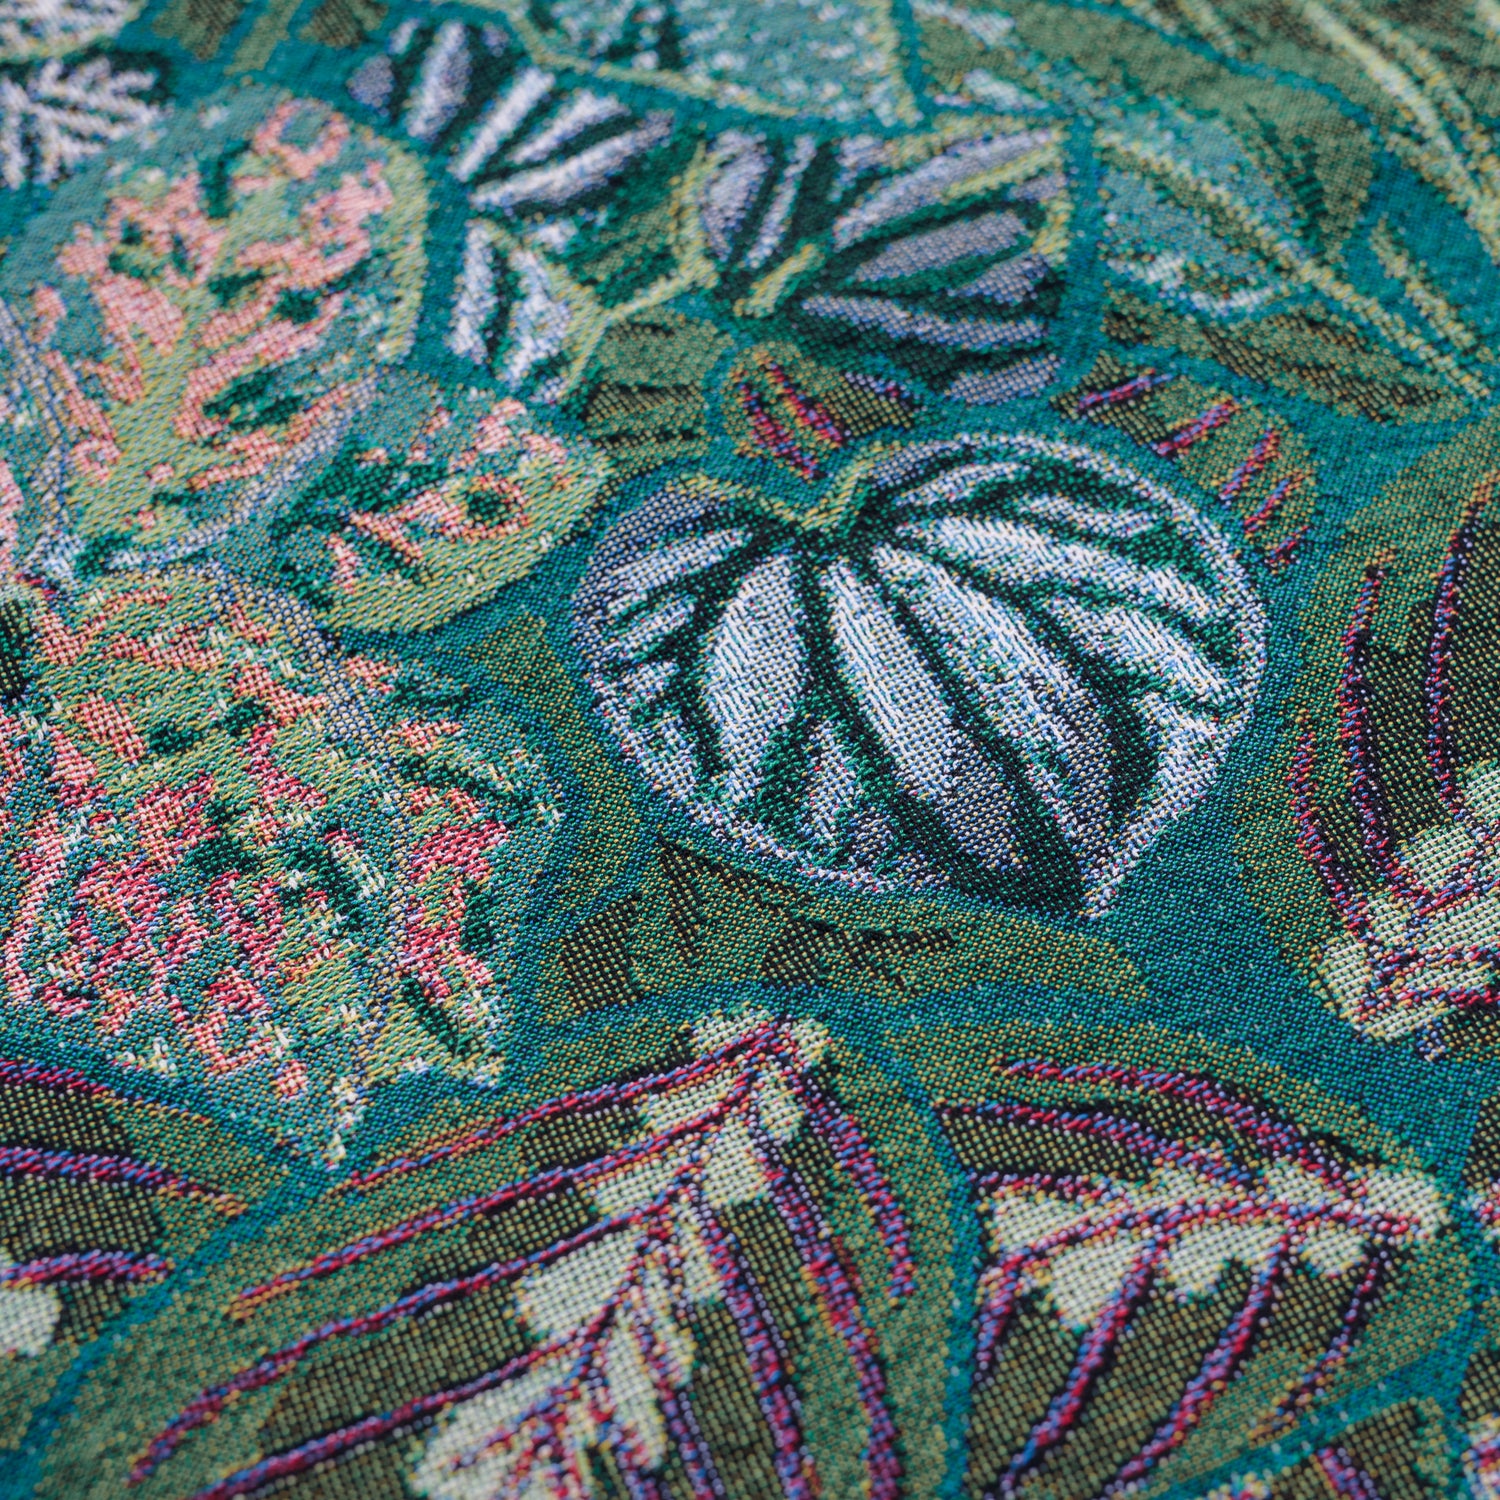 stunning detail of woven wrap blanket with fringe featuring lots of different houseplants